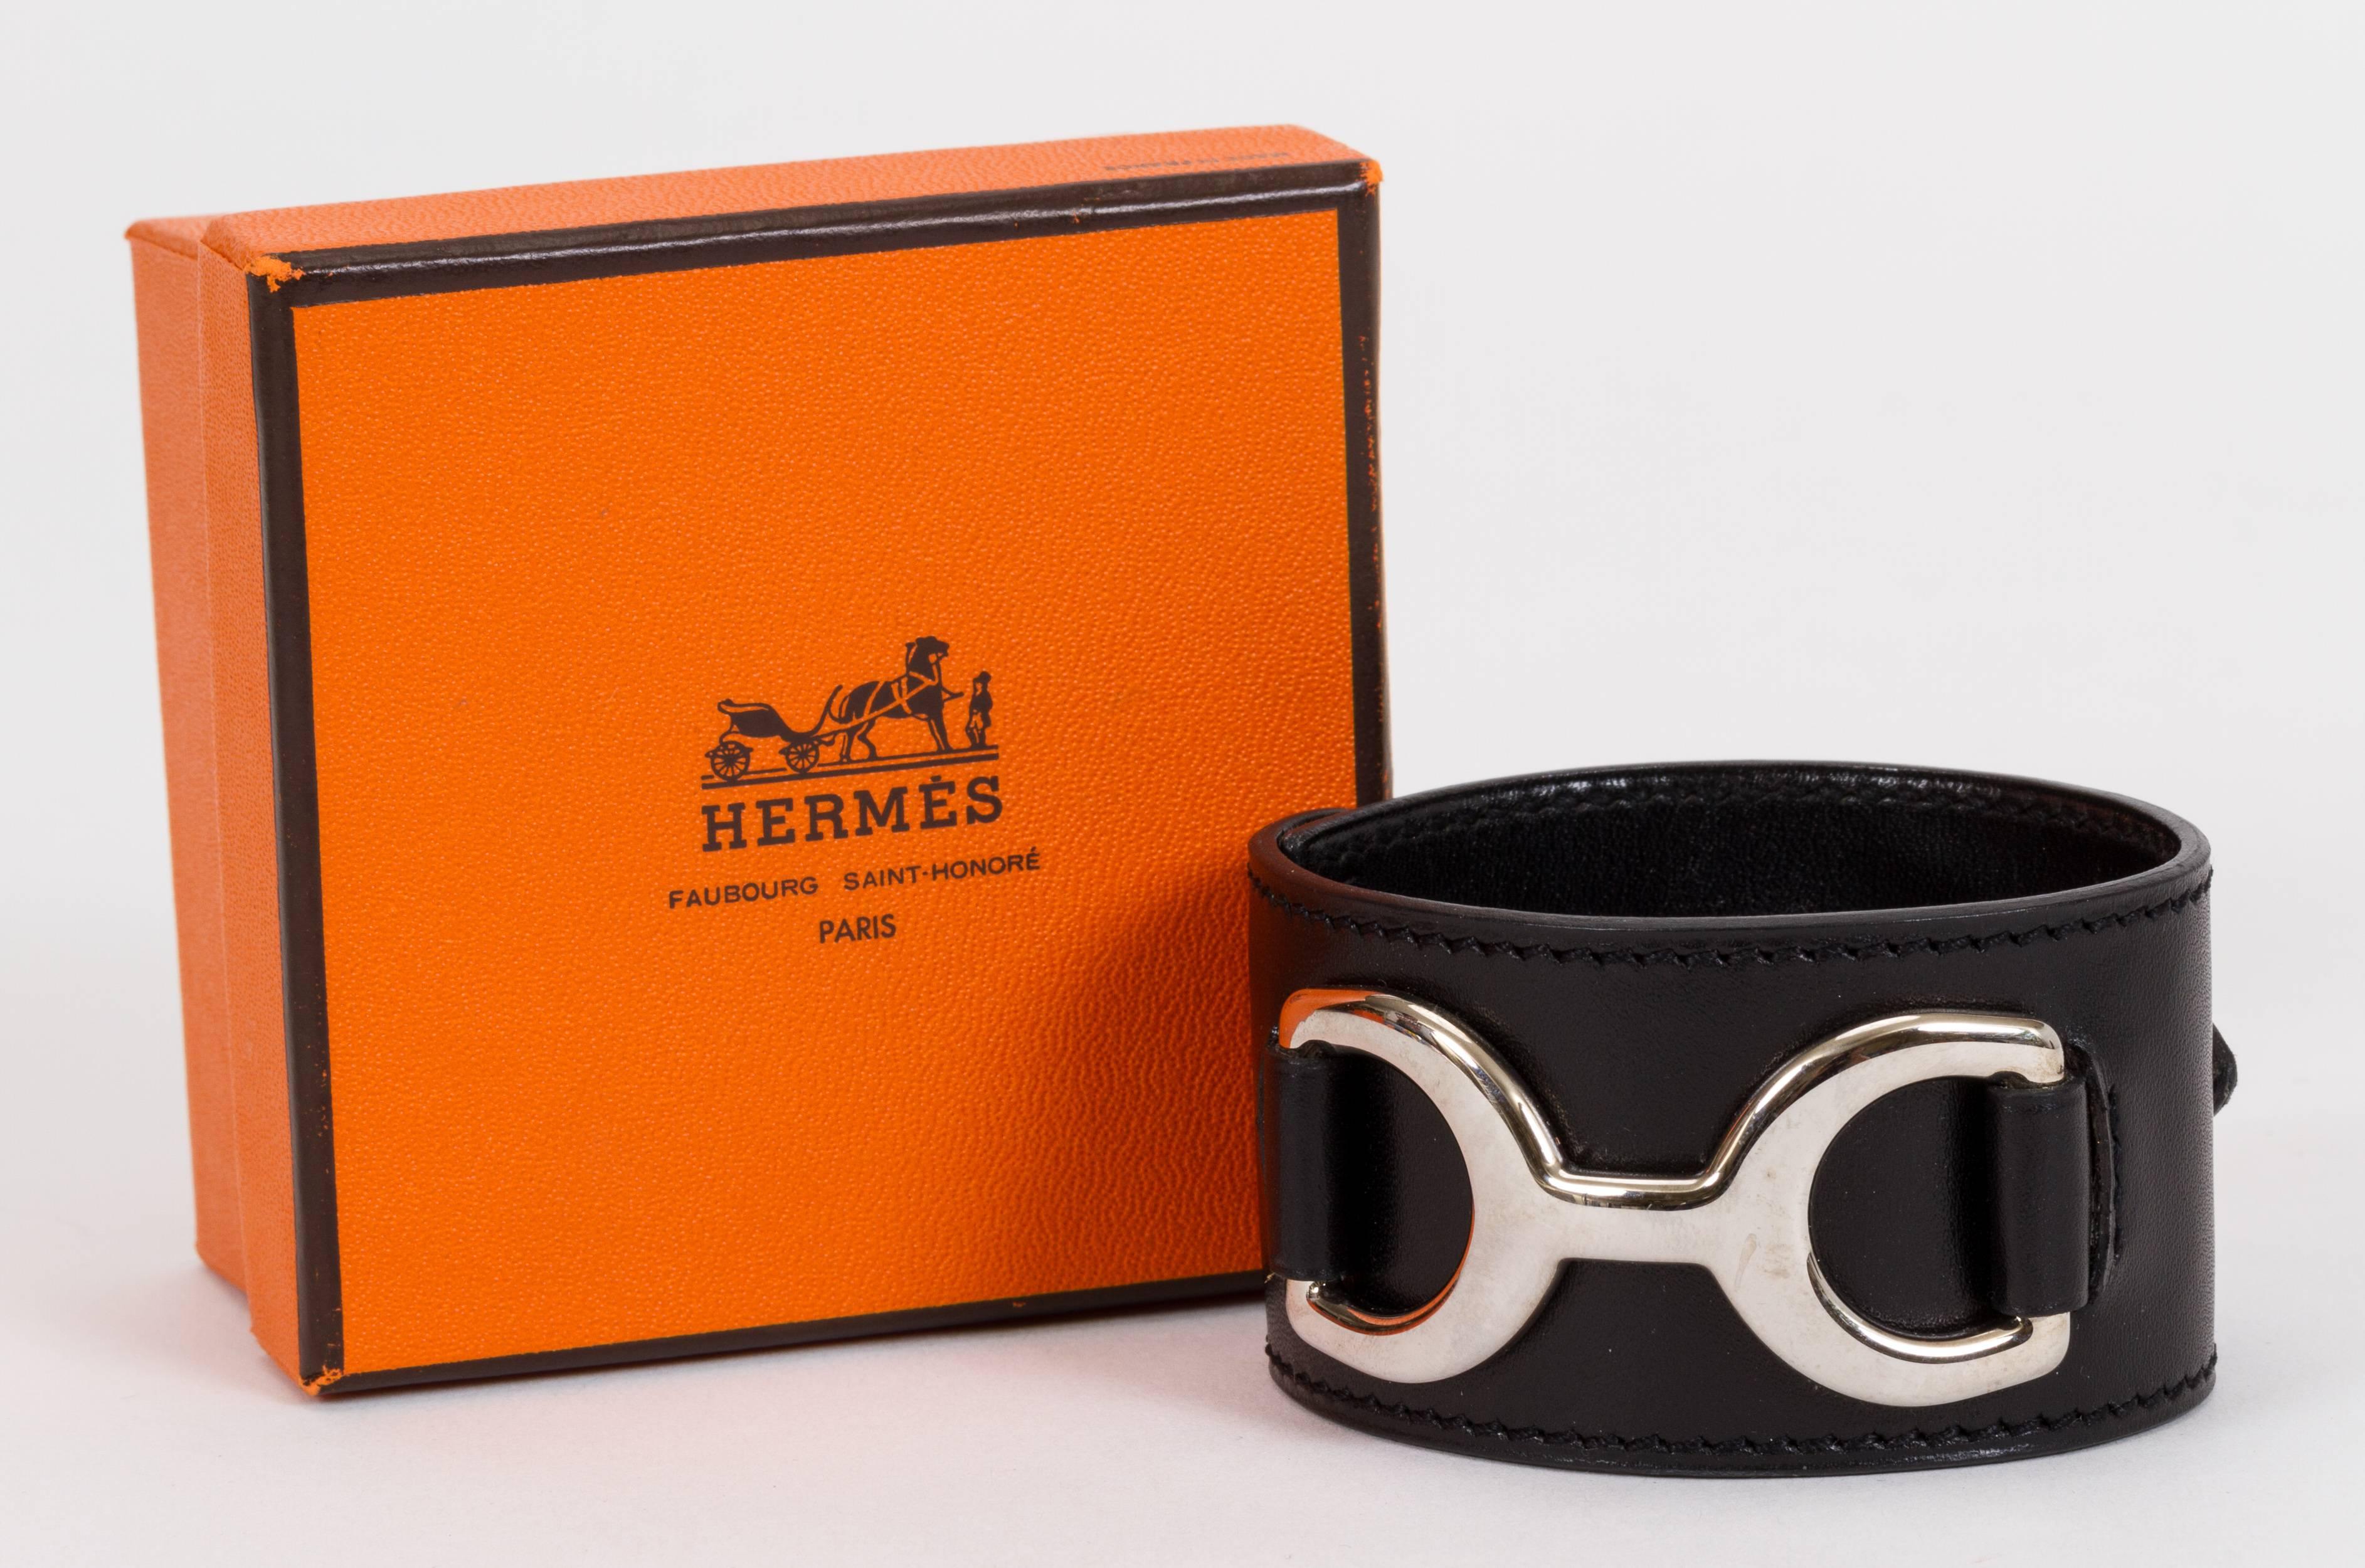 Hermès black leather and palladium hardware mors wide adjustable cuff. Size medium. Comes with original box. Stamped H for 2004. Minor scuffs on leather and hardware.